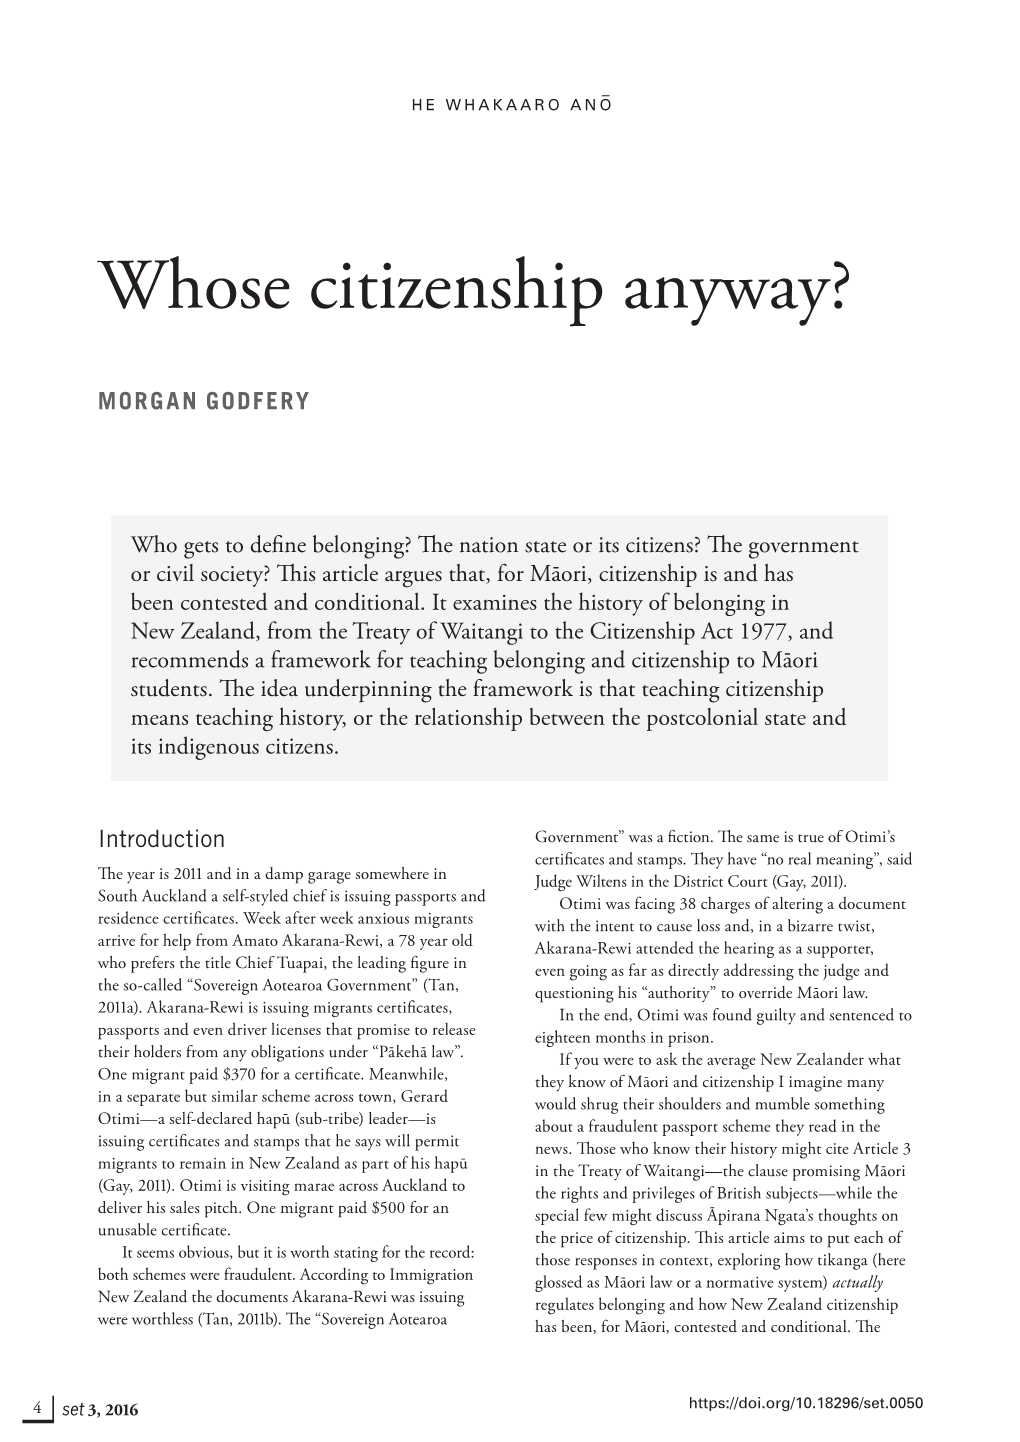 Whose Citizenship Anyway?